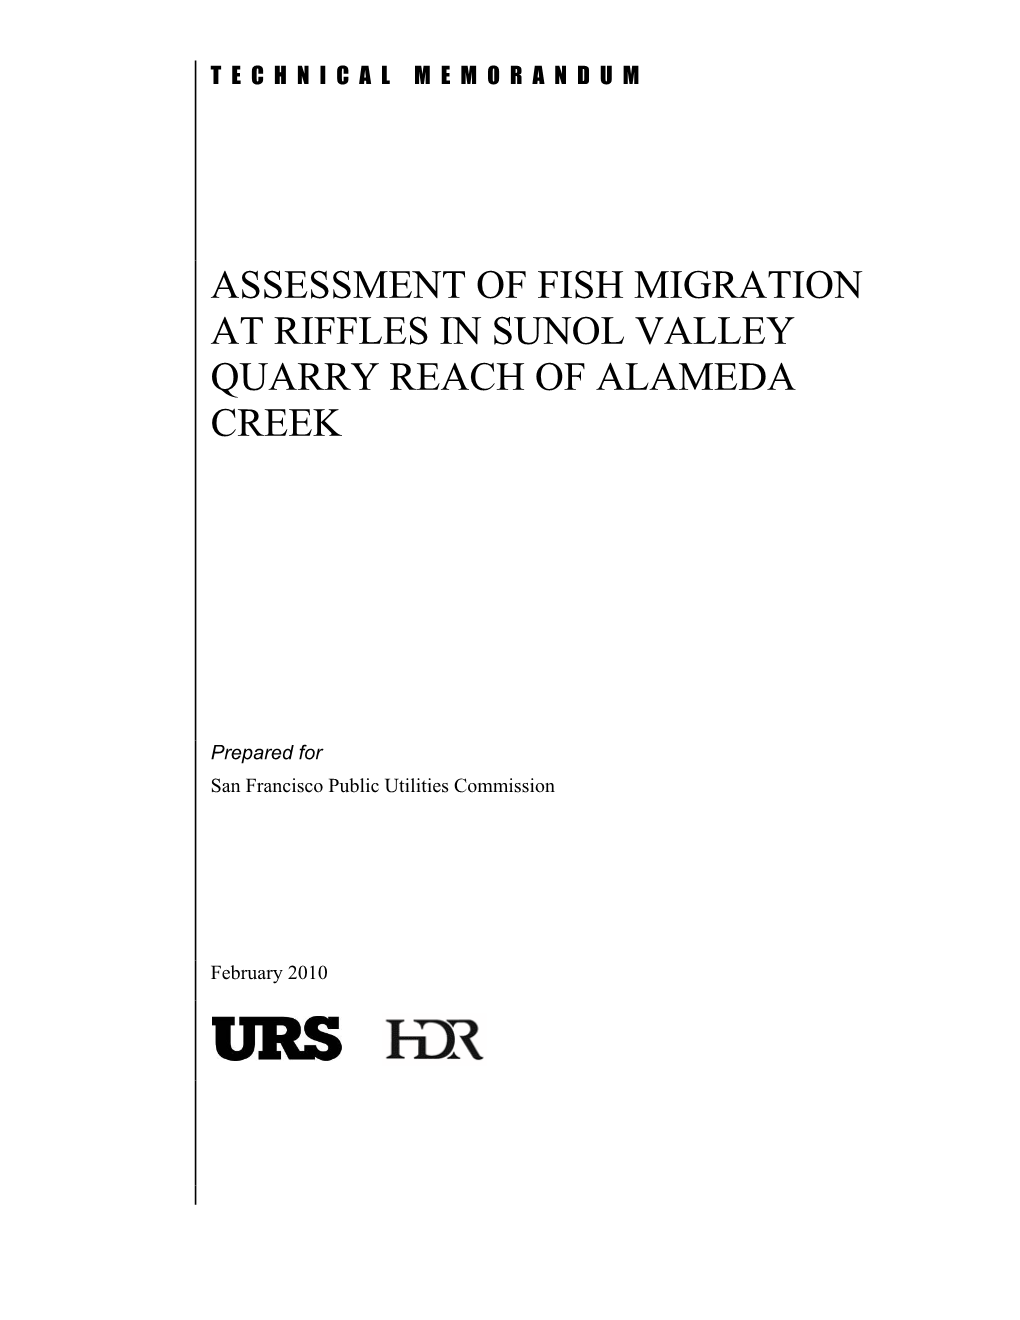 Assessment of Fish Migration at Riffles in Sunol Valley Quarry Reach of Alameda Creek